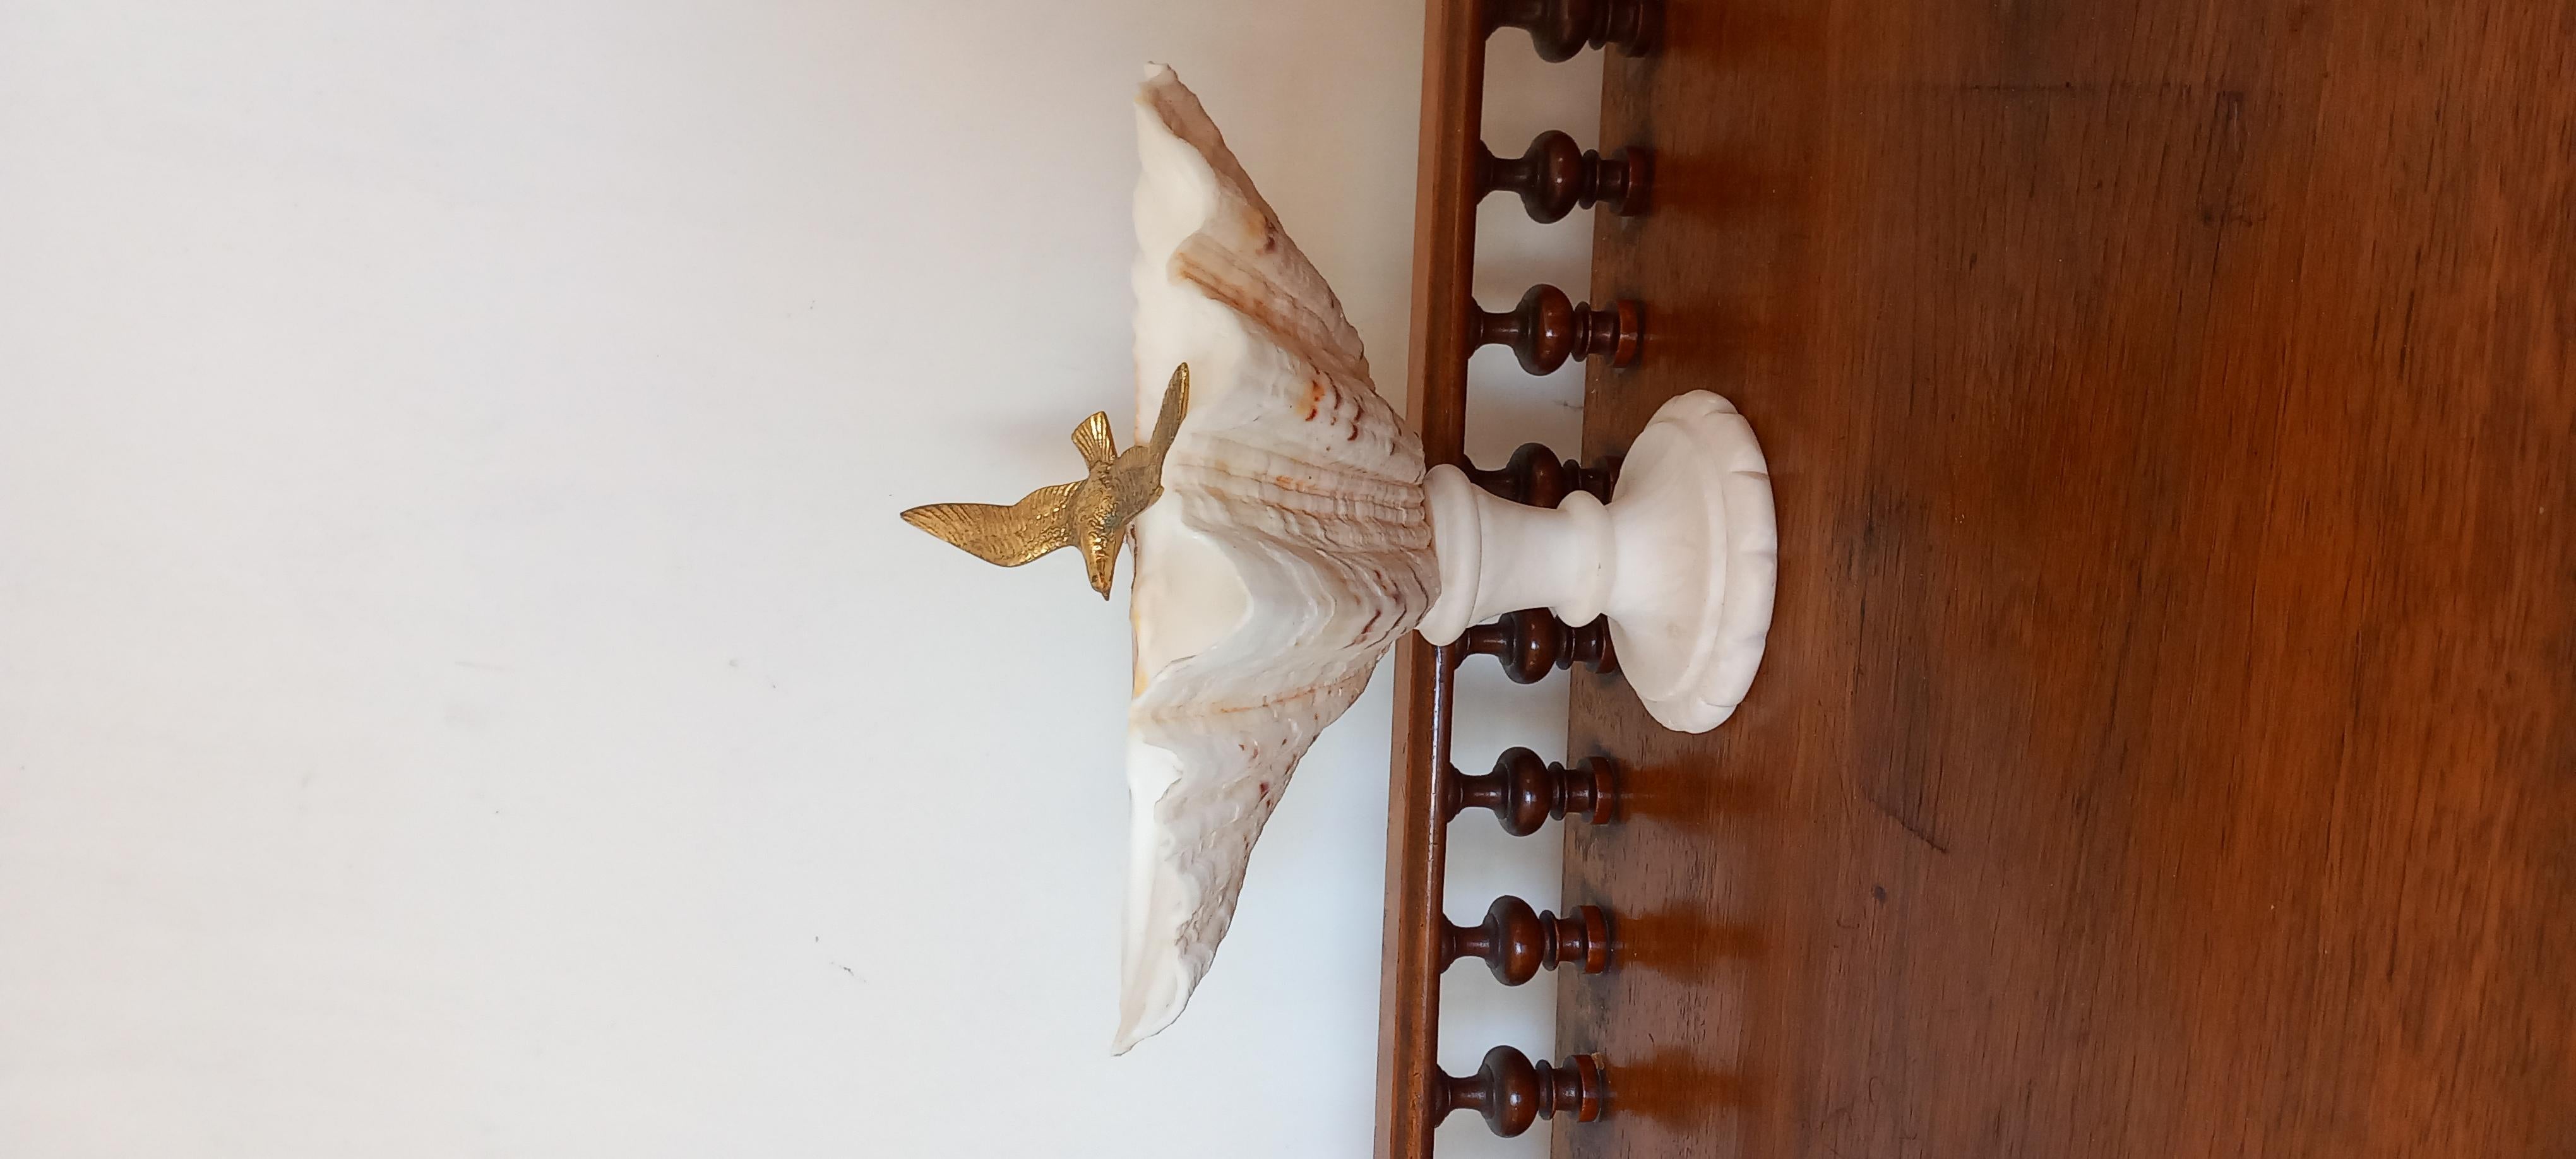  Shell Natural Specimen  With White Marble Pedestal Bronze Bird Can Be Removed For Sale 10